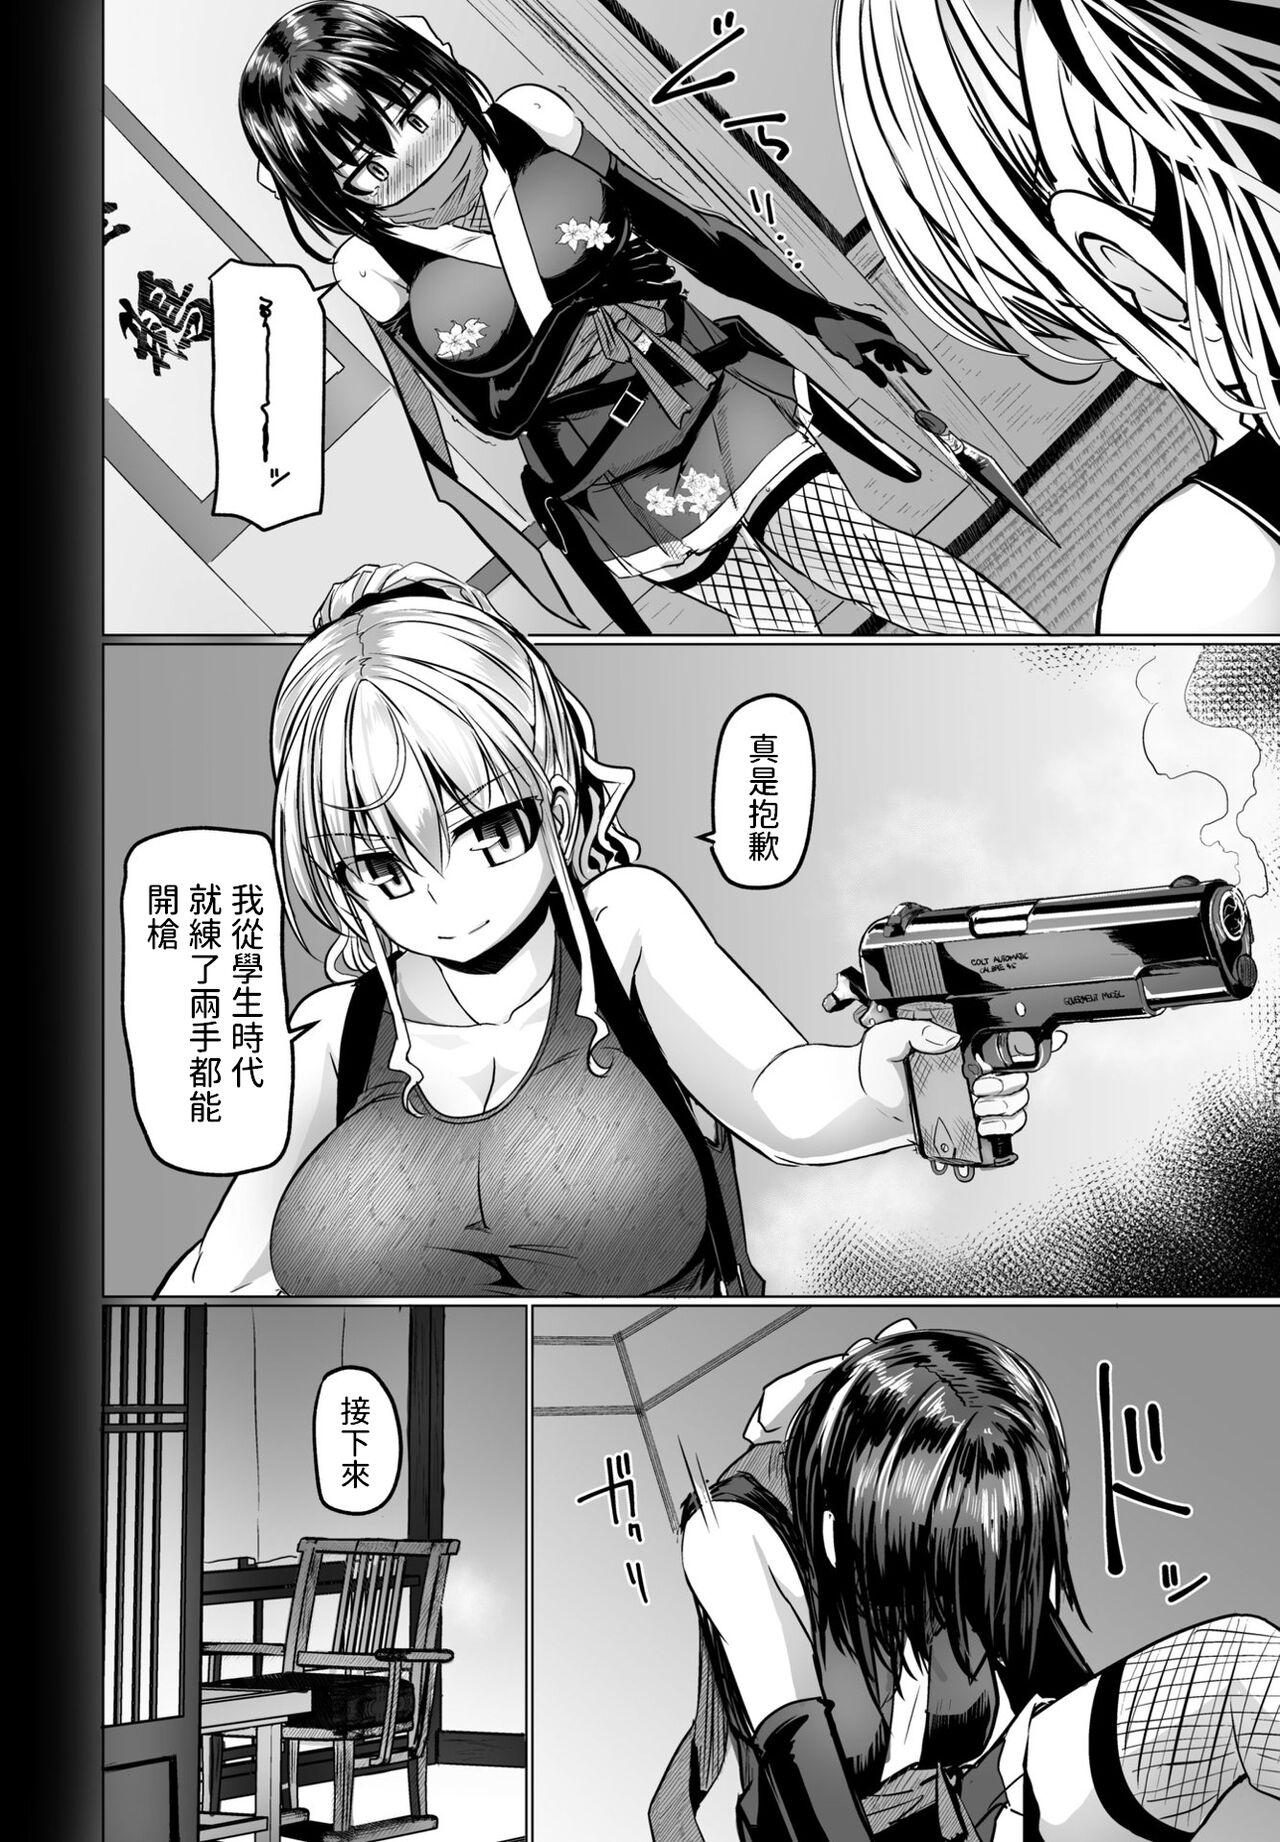 Russia THE NAKASEN DRIVER Ch. 3 Polla - Page 4